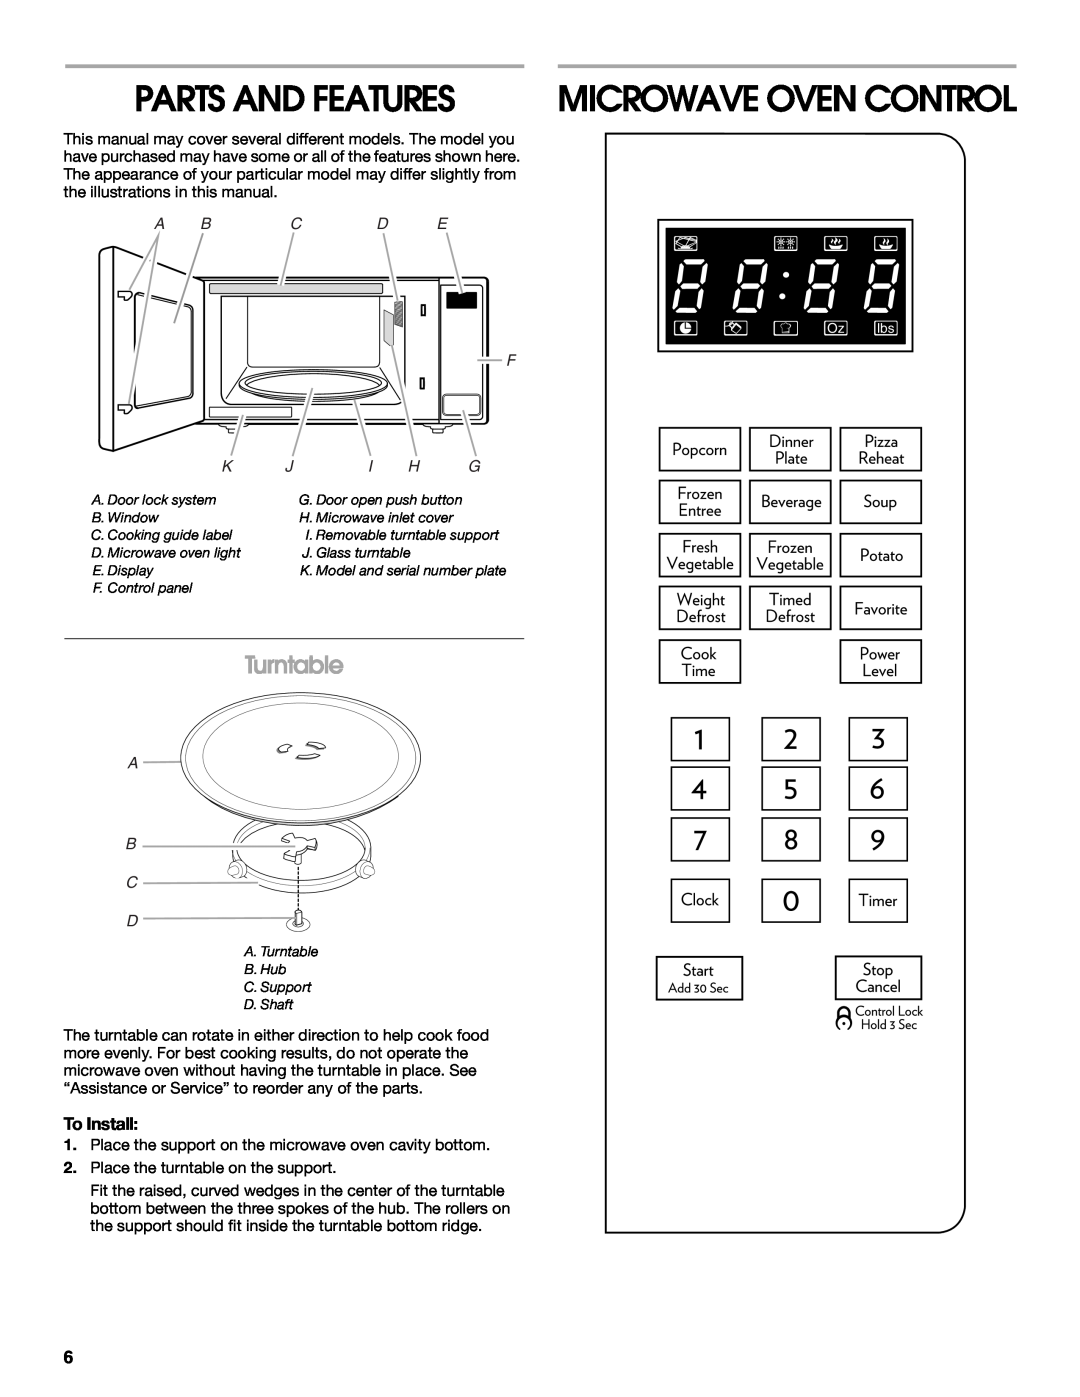 Jenn-Air JMC1116 manual Parts And Features, Turntable, Microwave Oven Control, A B C D E F 